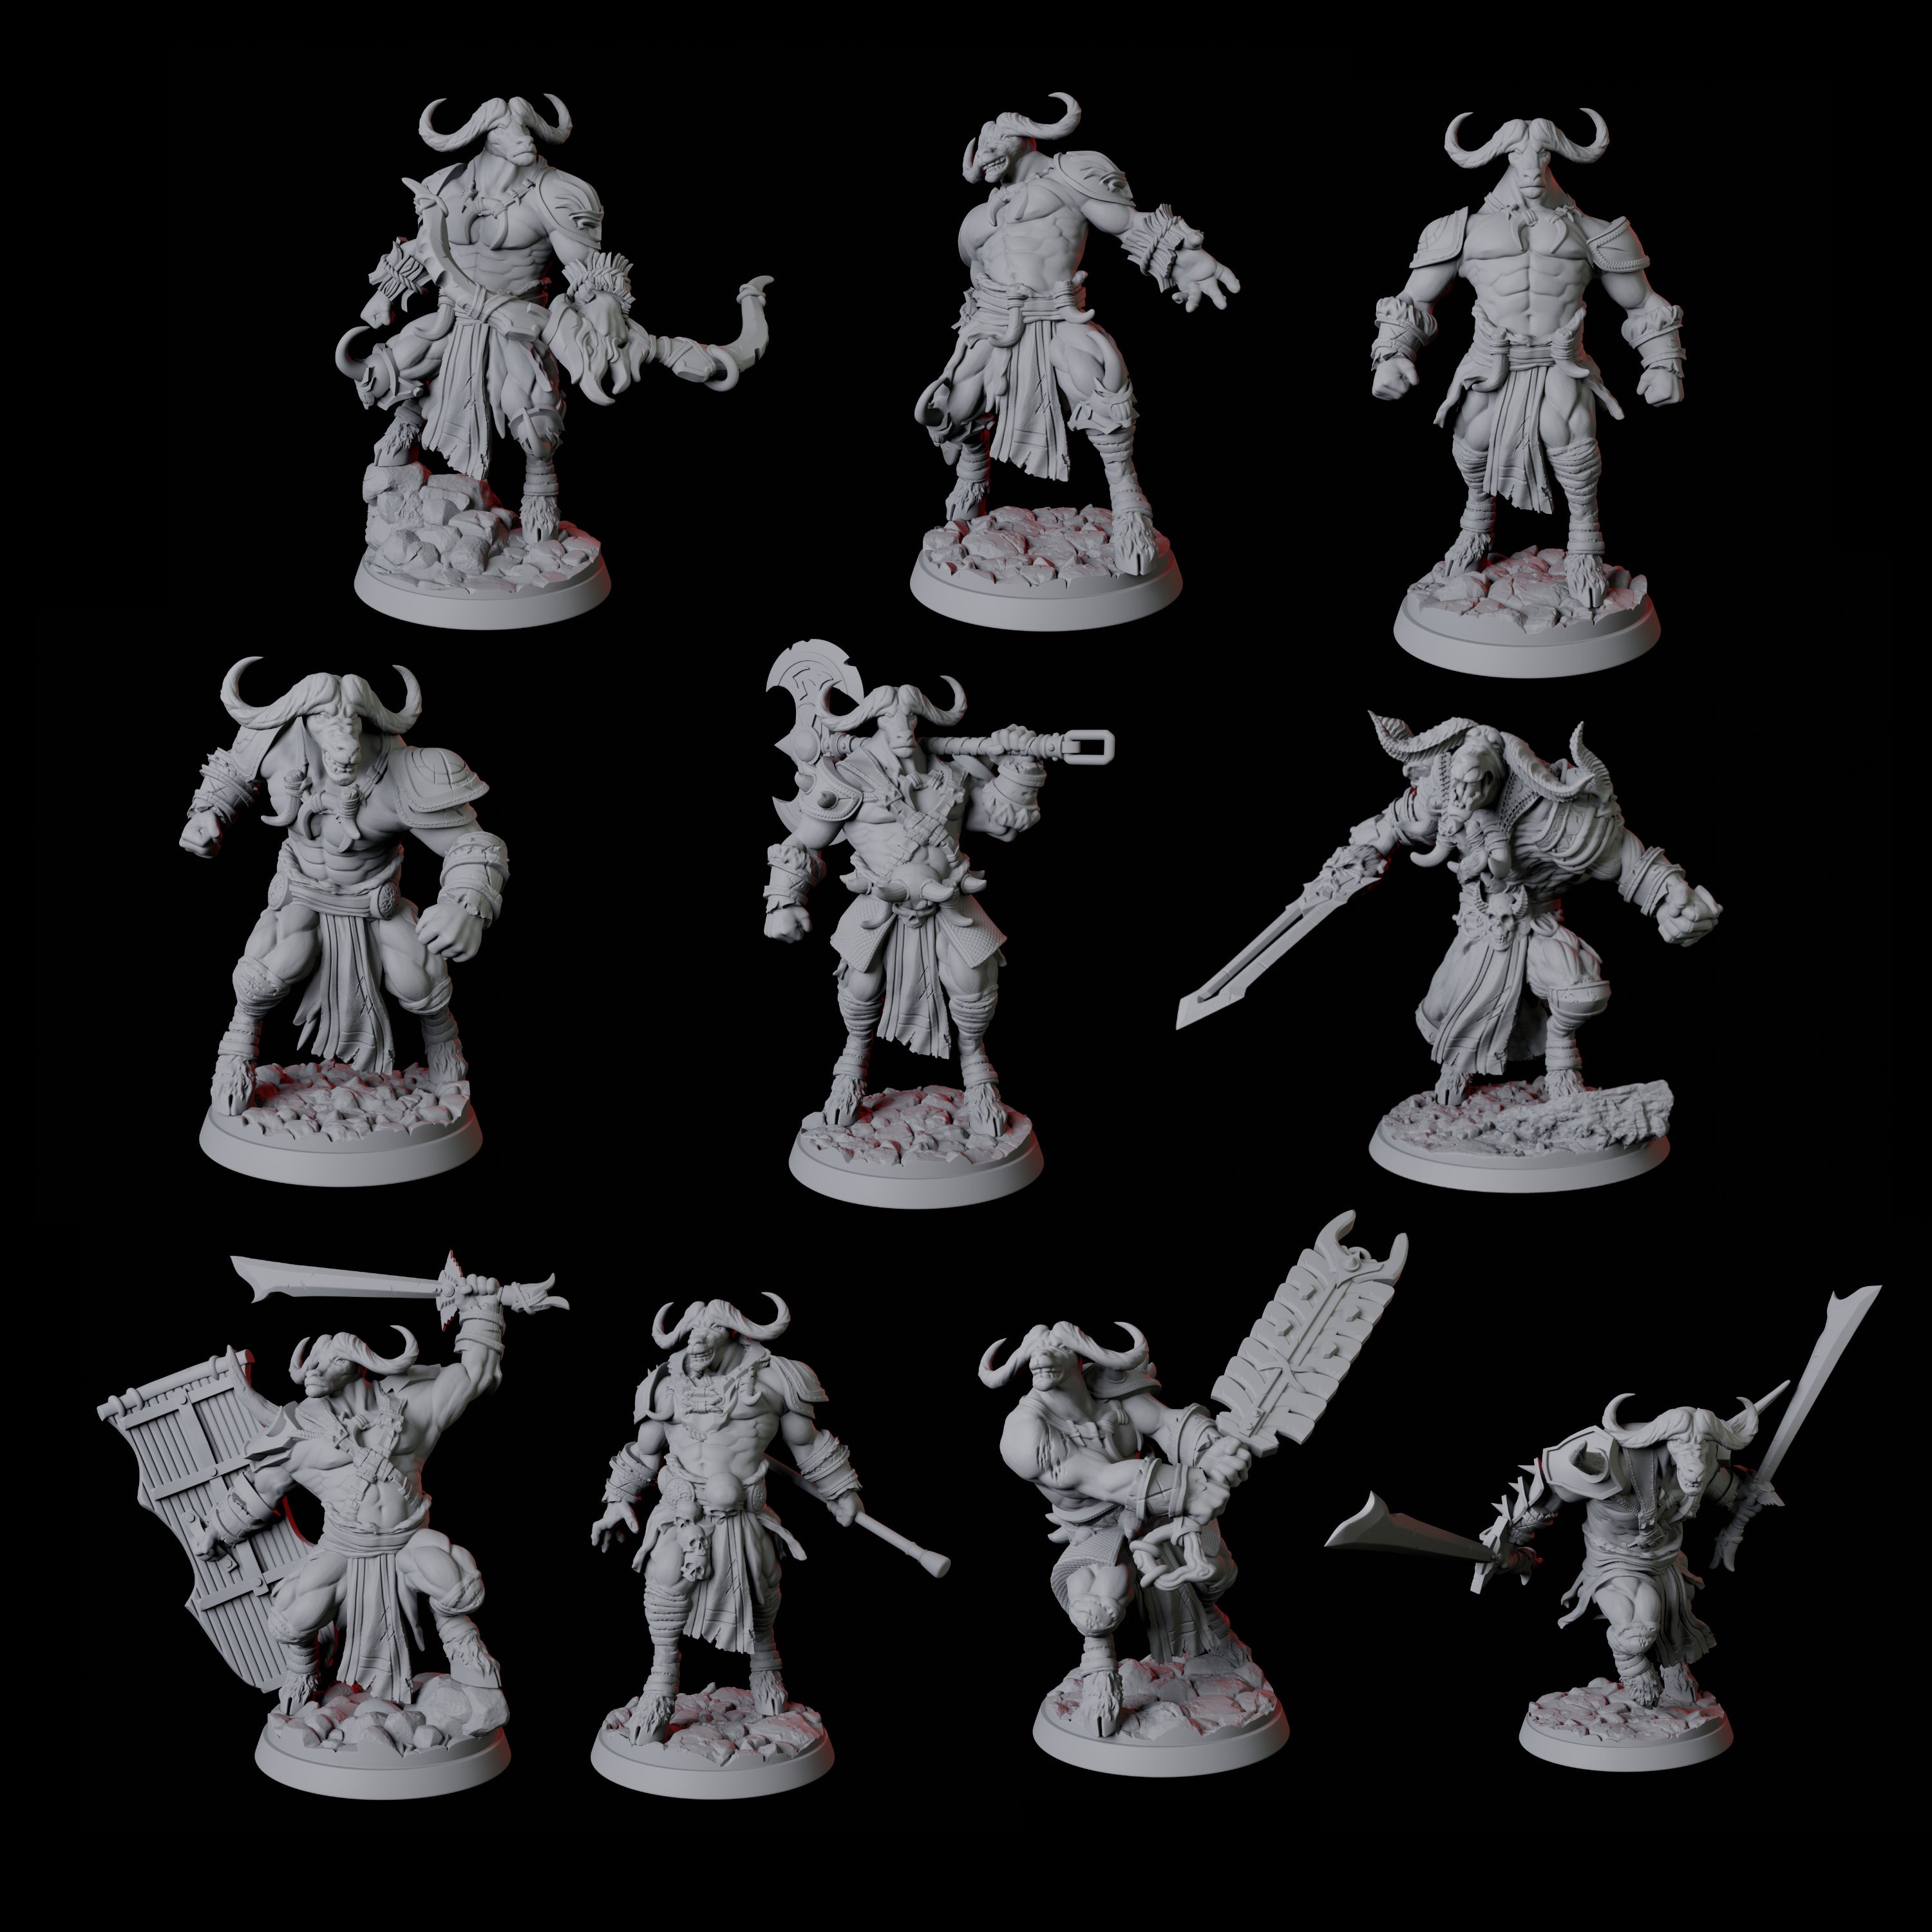 Ten Yakfolk Bundle Miniature for Dungeons and Dragons, Pathfinder or other TTRPGs